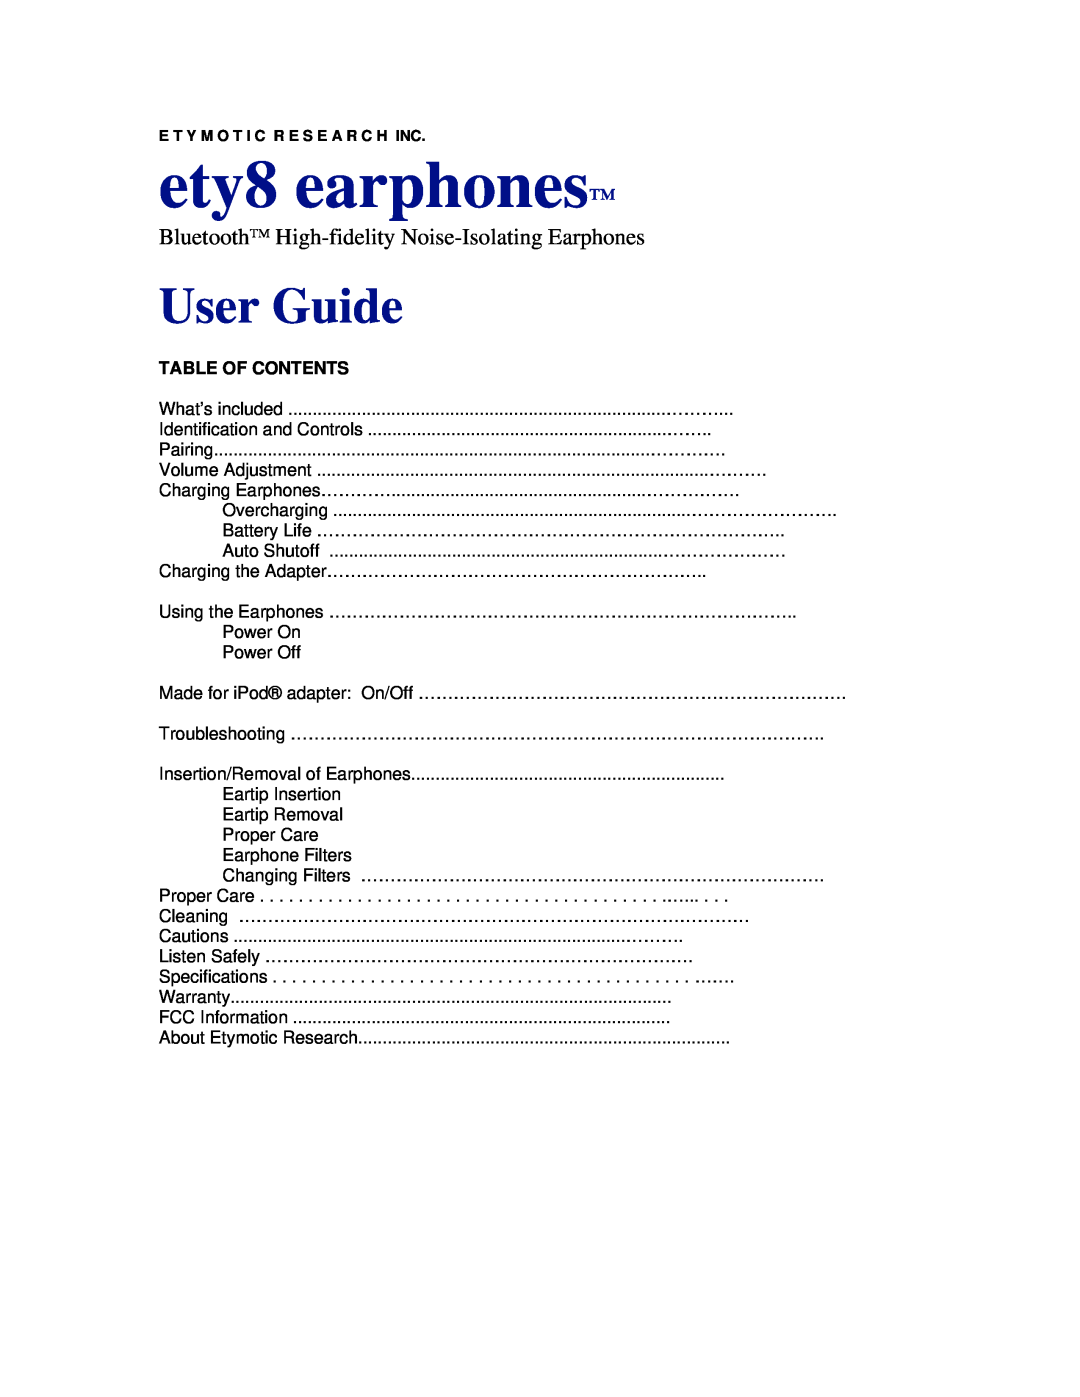 Etymotic Research Ety8 specifications Table Of Contents, ety8 earphones, User Guide 